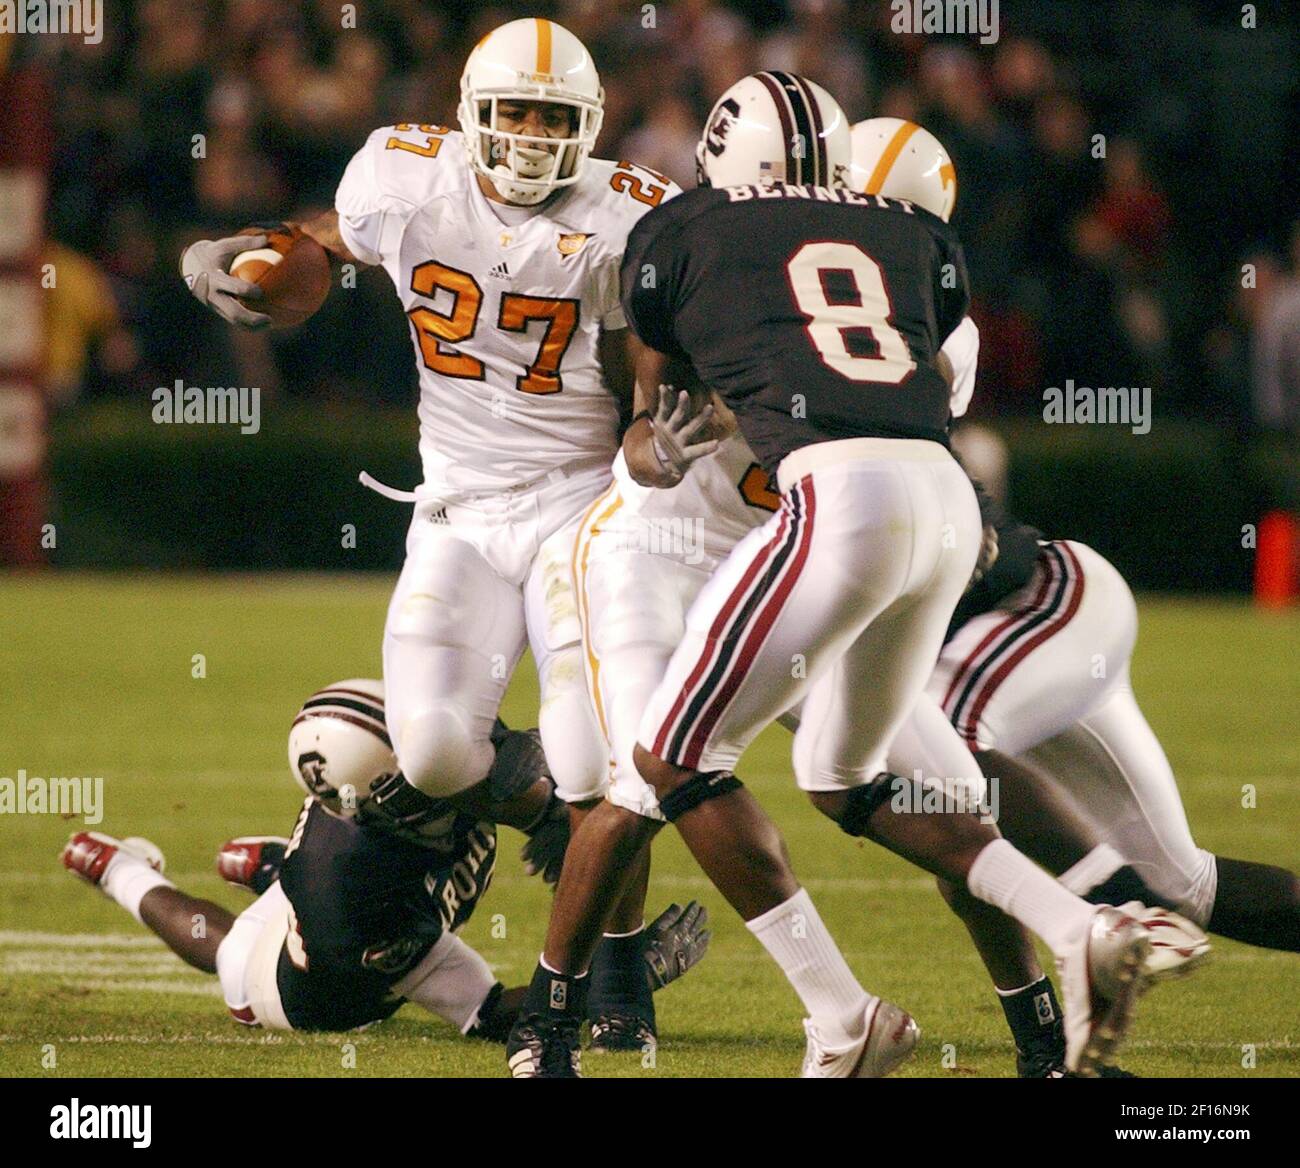 Tennessee tailback Arian Foster (27) rushes for a six-yard gain before  being tackled by University of South Carolina cornerback Fred Bennett in  the first quarter at Williams-Brice Stadium in Columbia, South Carolina,